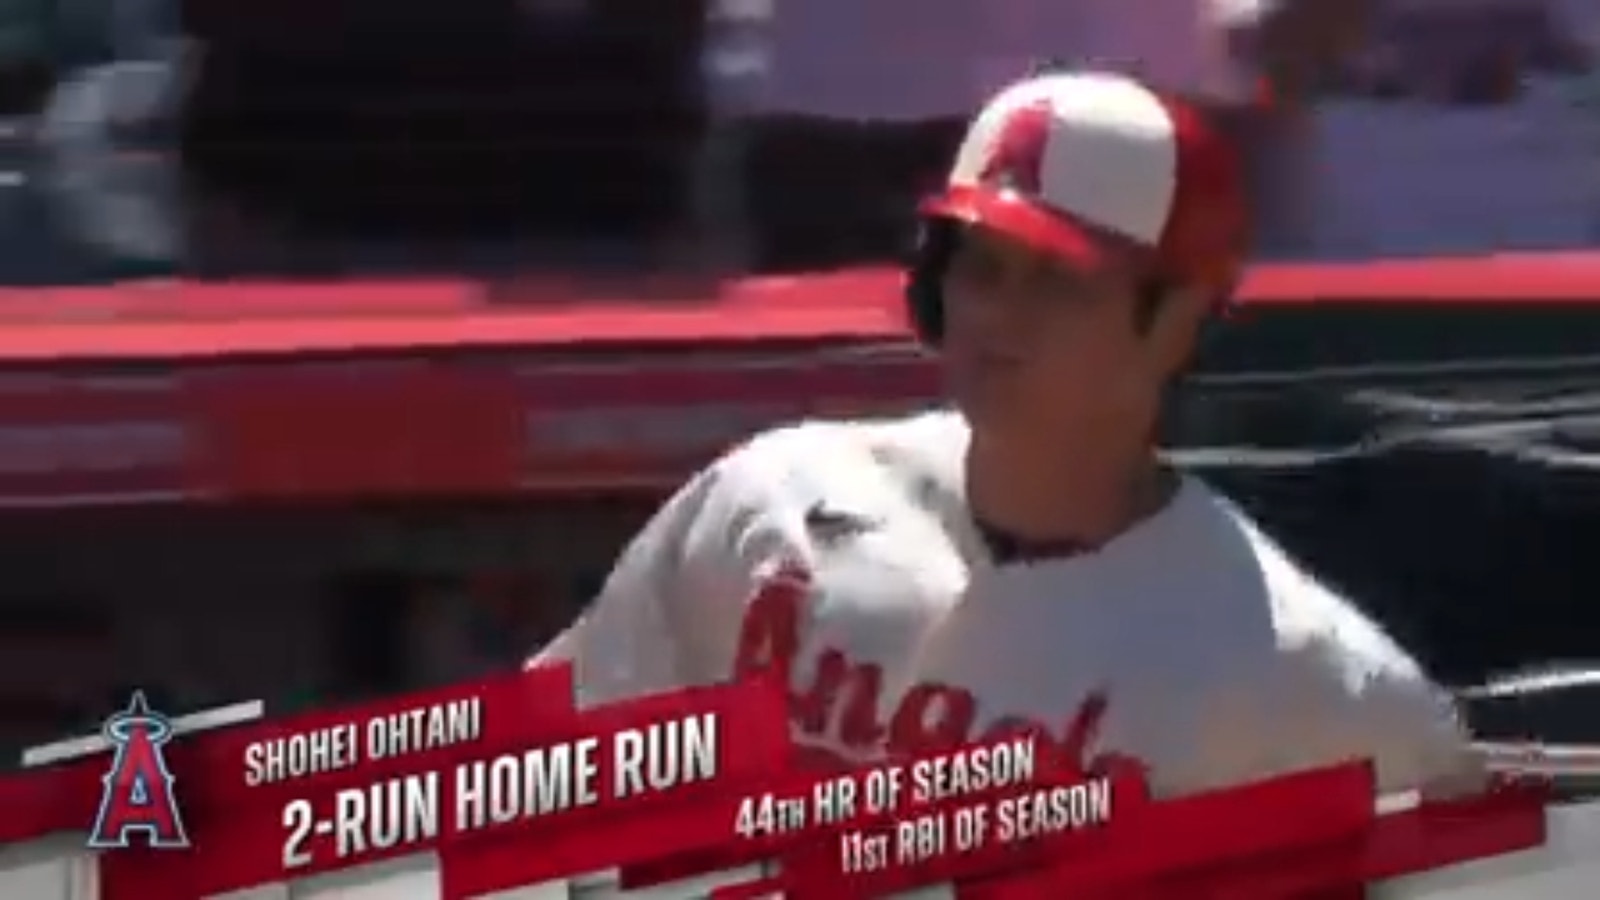 Shohei Ohtani hit an MLB-leading 44 HR to give the Angels the lead against the Reds